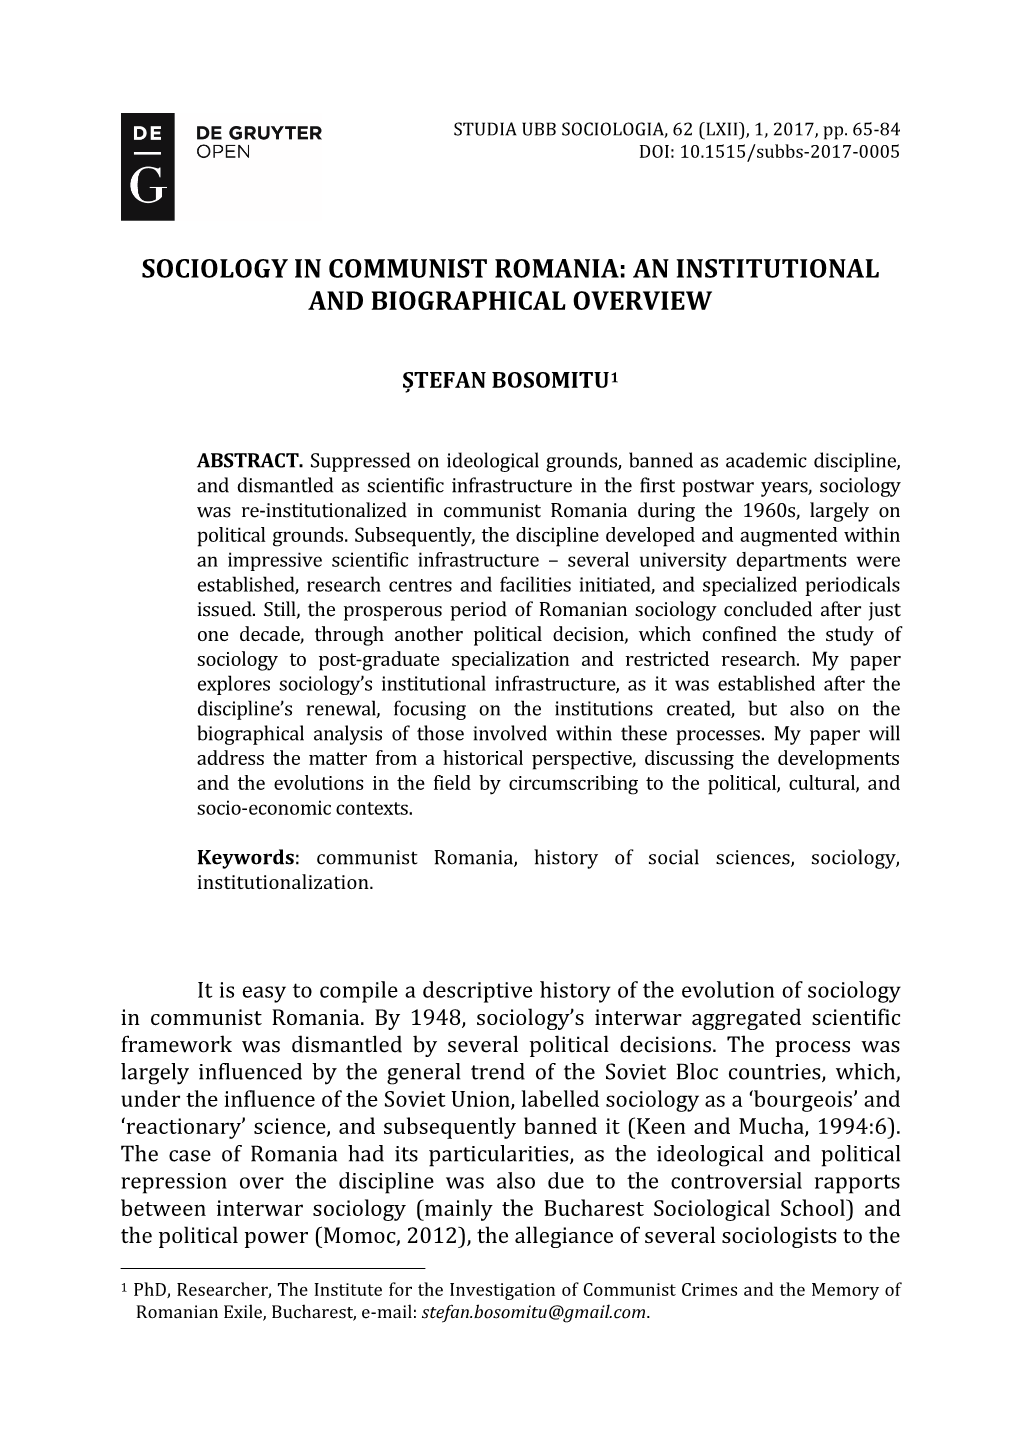 Sociology in Communist Romania: an Institutional and Biographical Overview